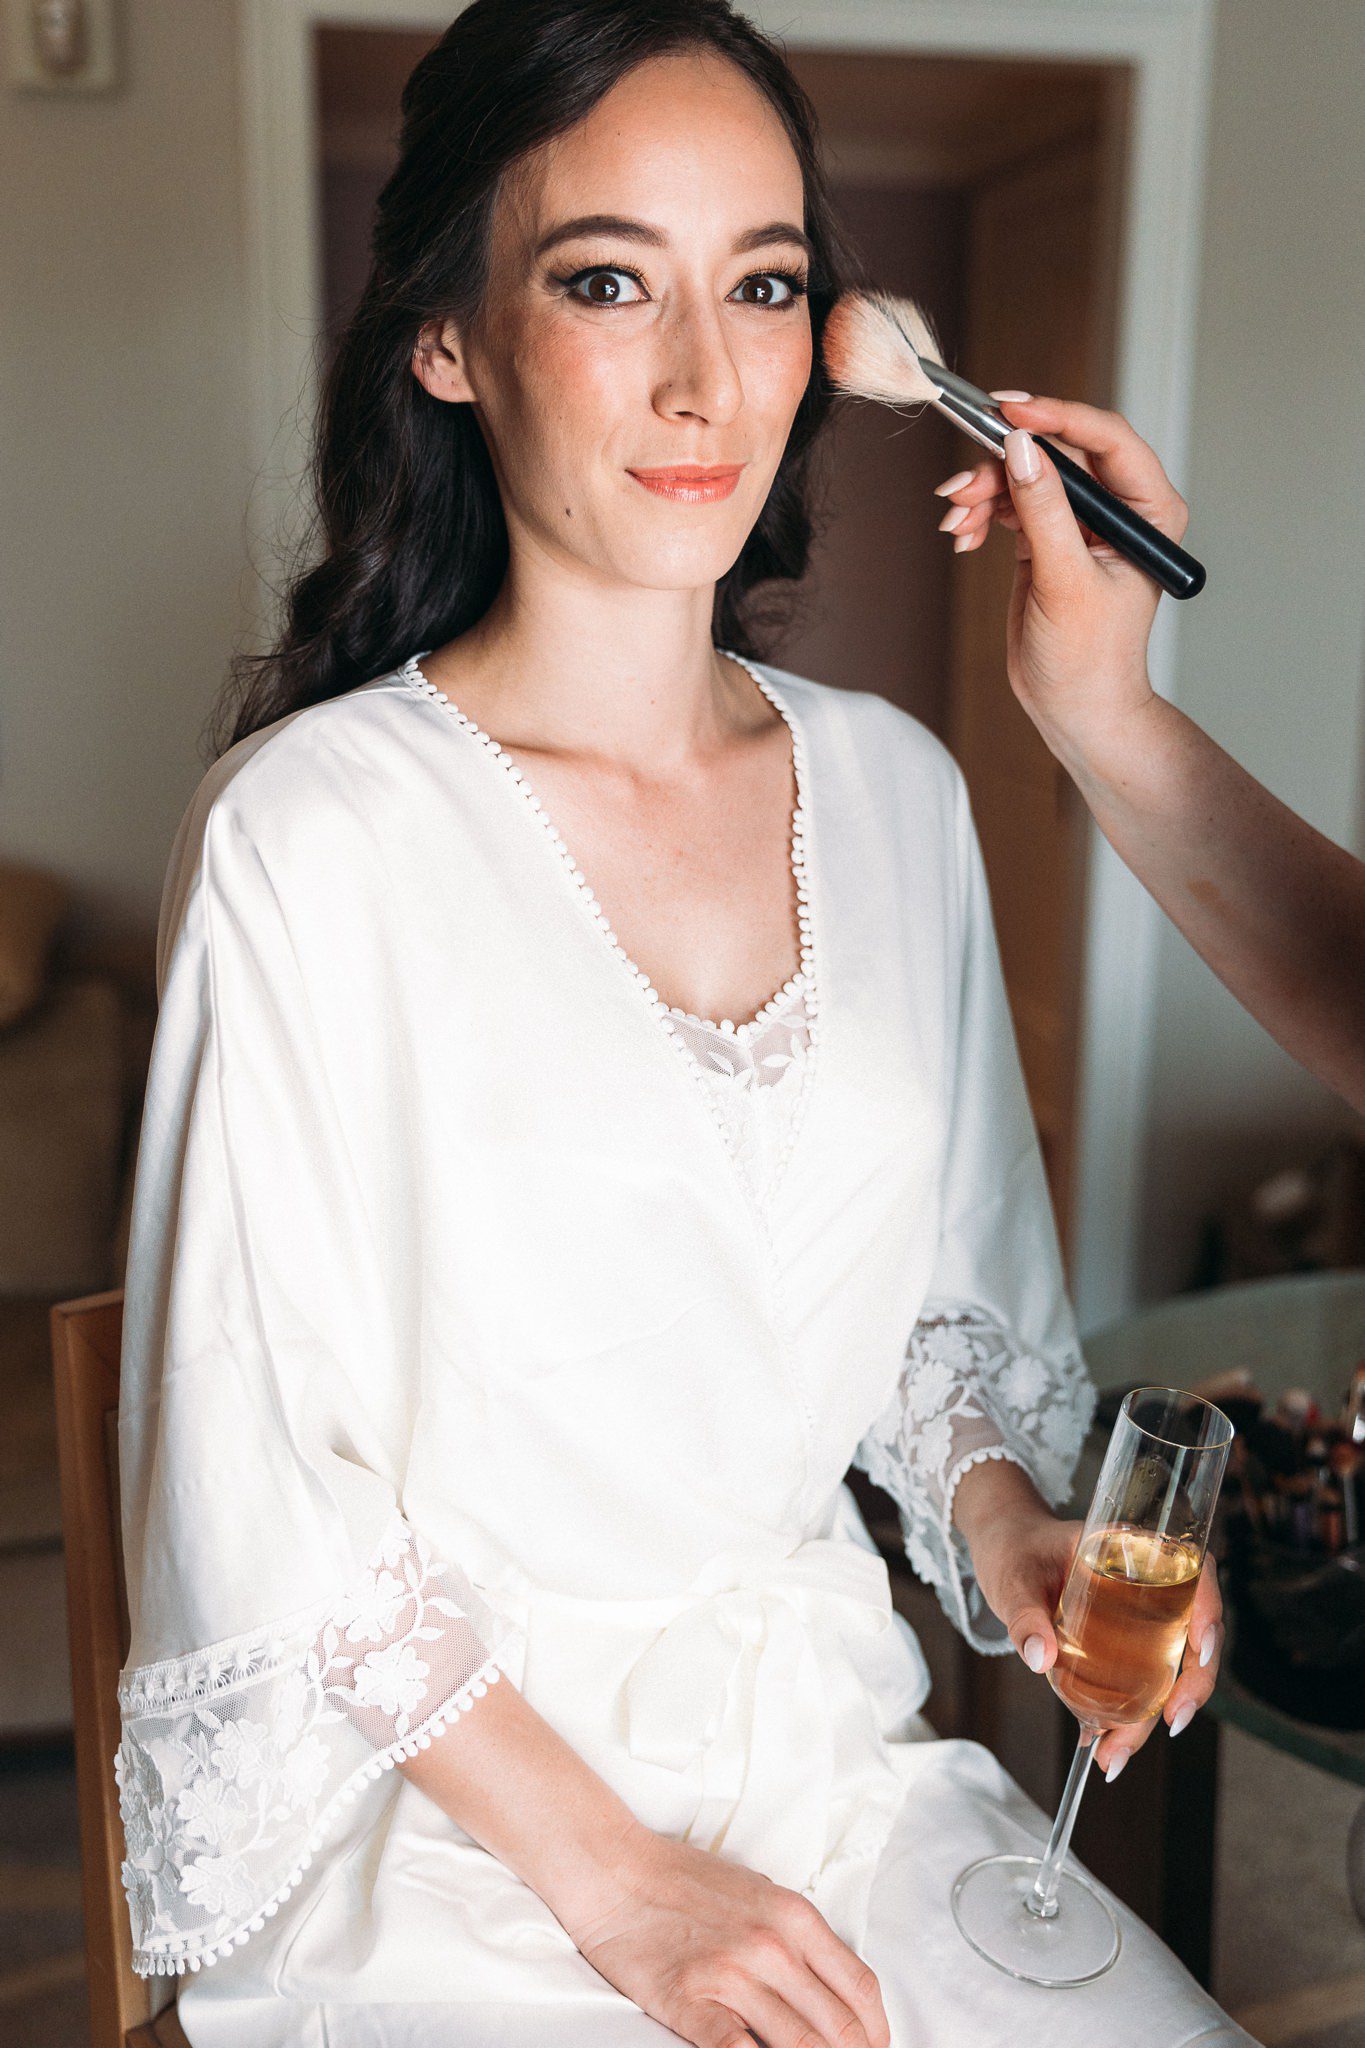 makeup being applied to bride's face